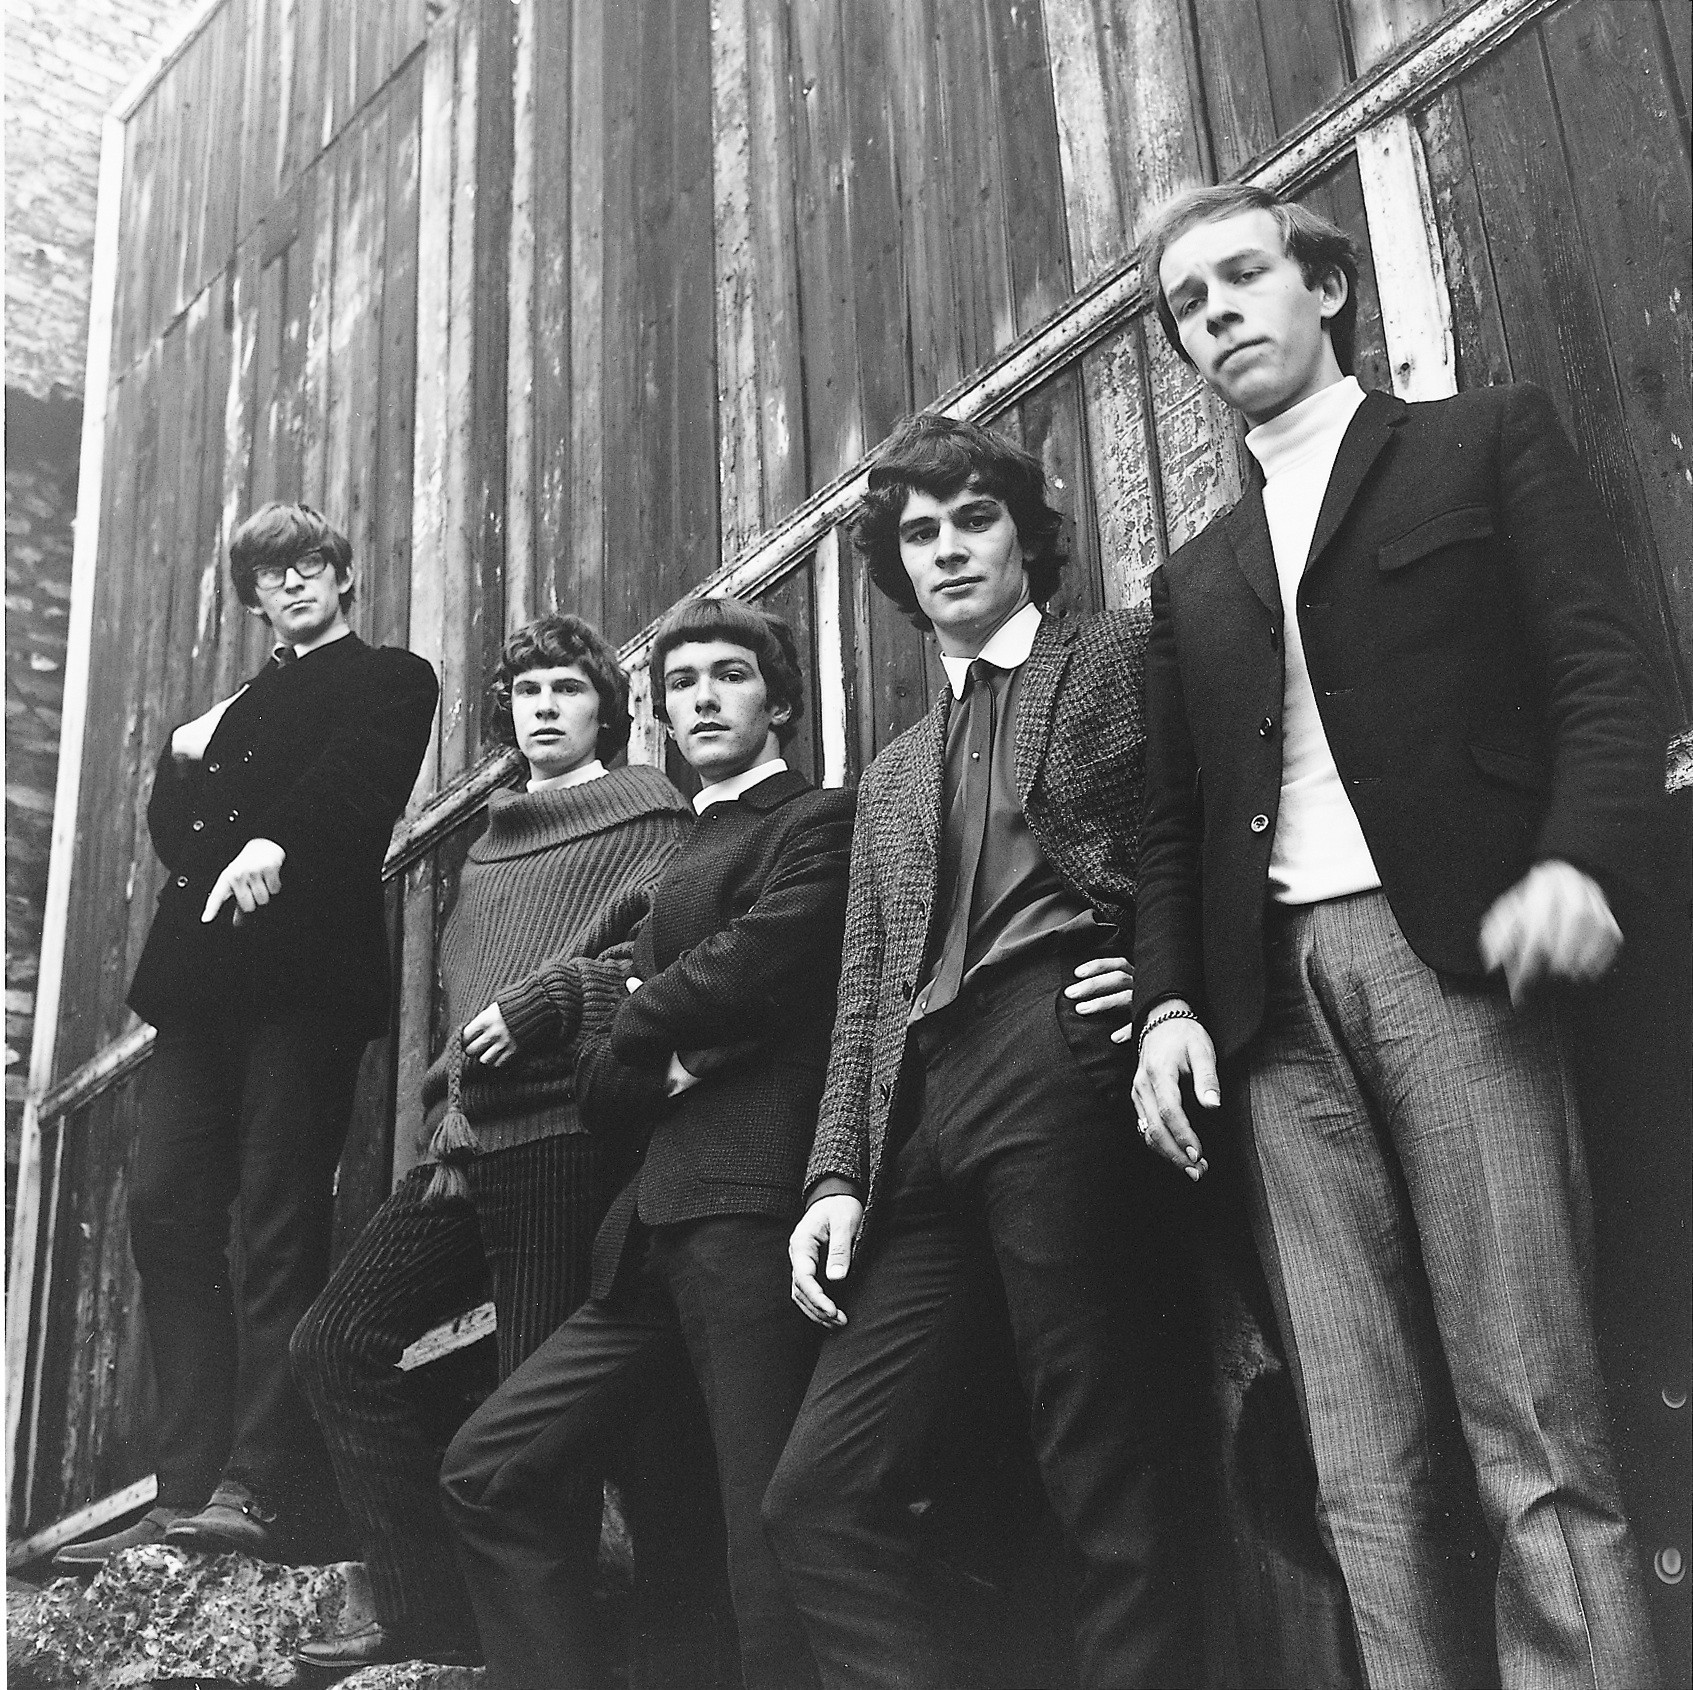 The Zombies